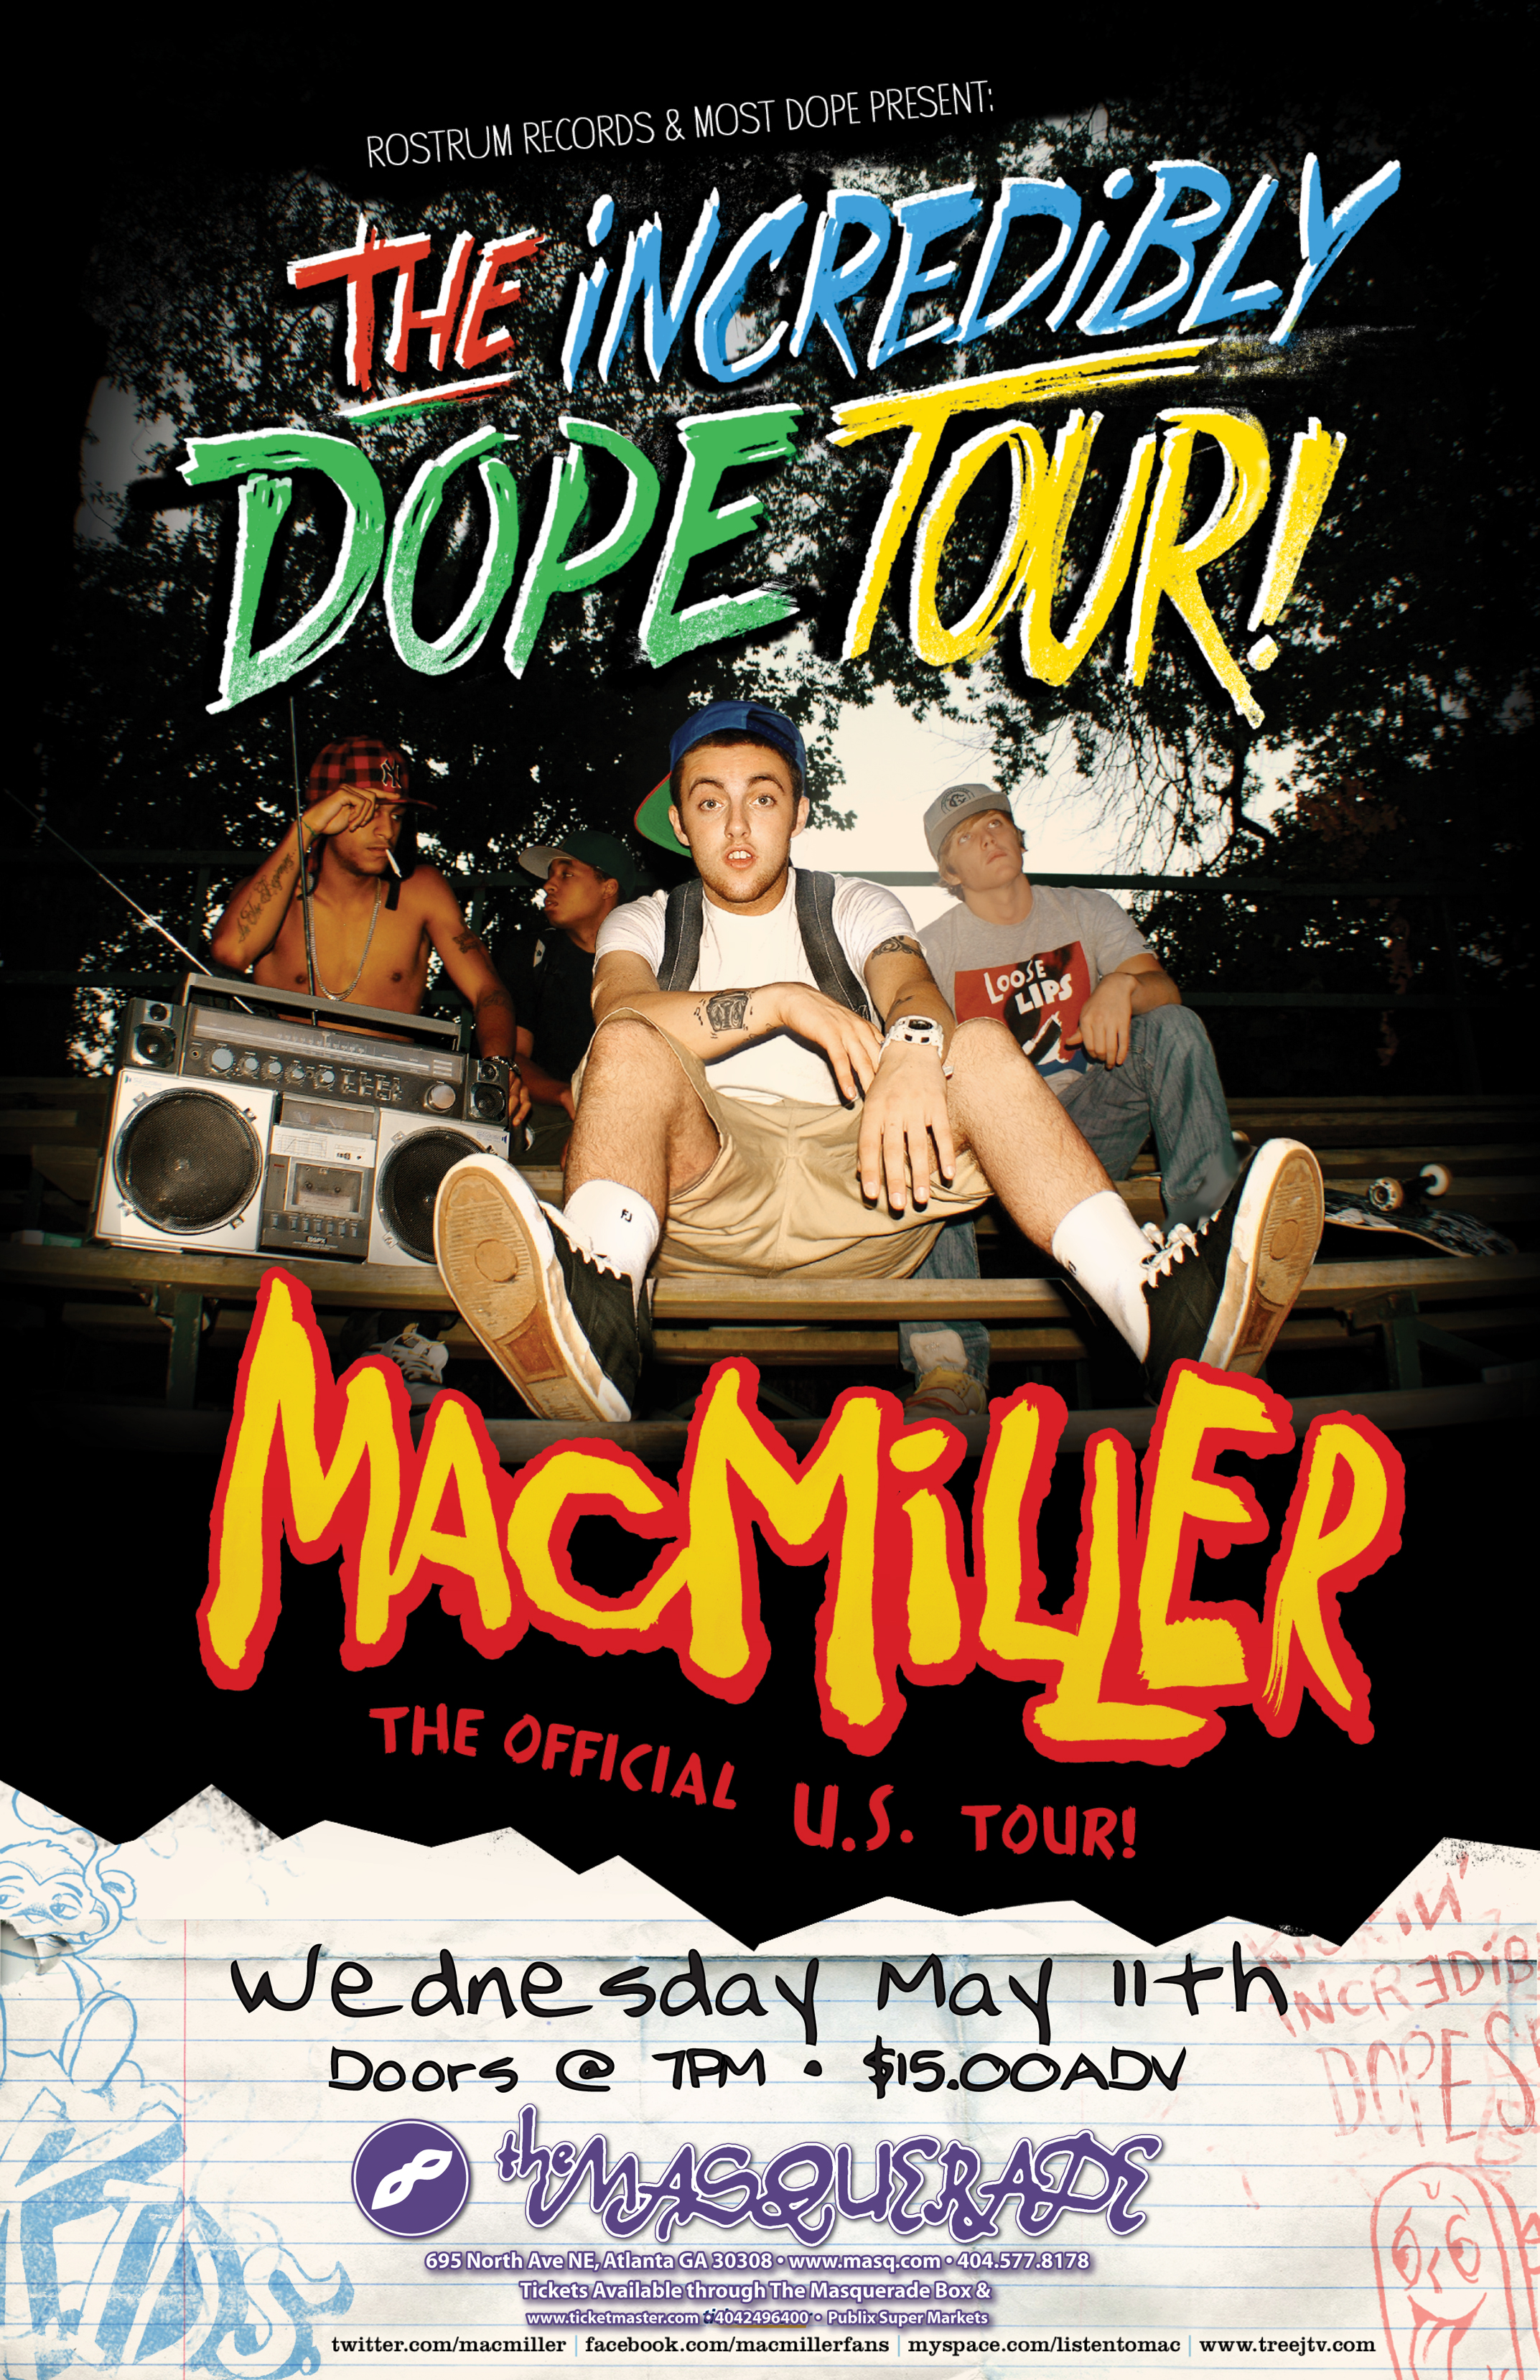 Free Tickets: Mac Miller & the Incredibly Dope Tour - May 11 @ Masq